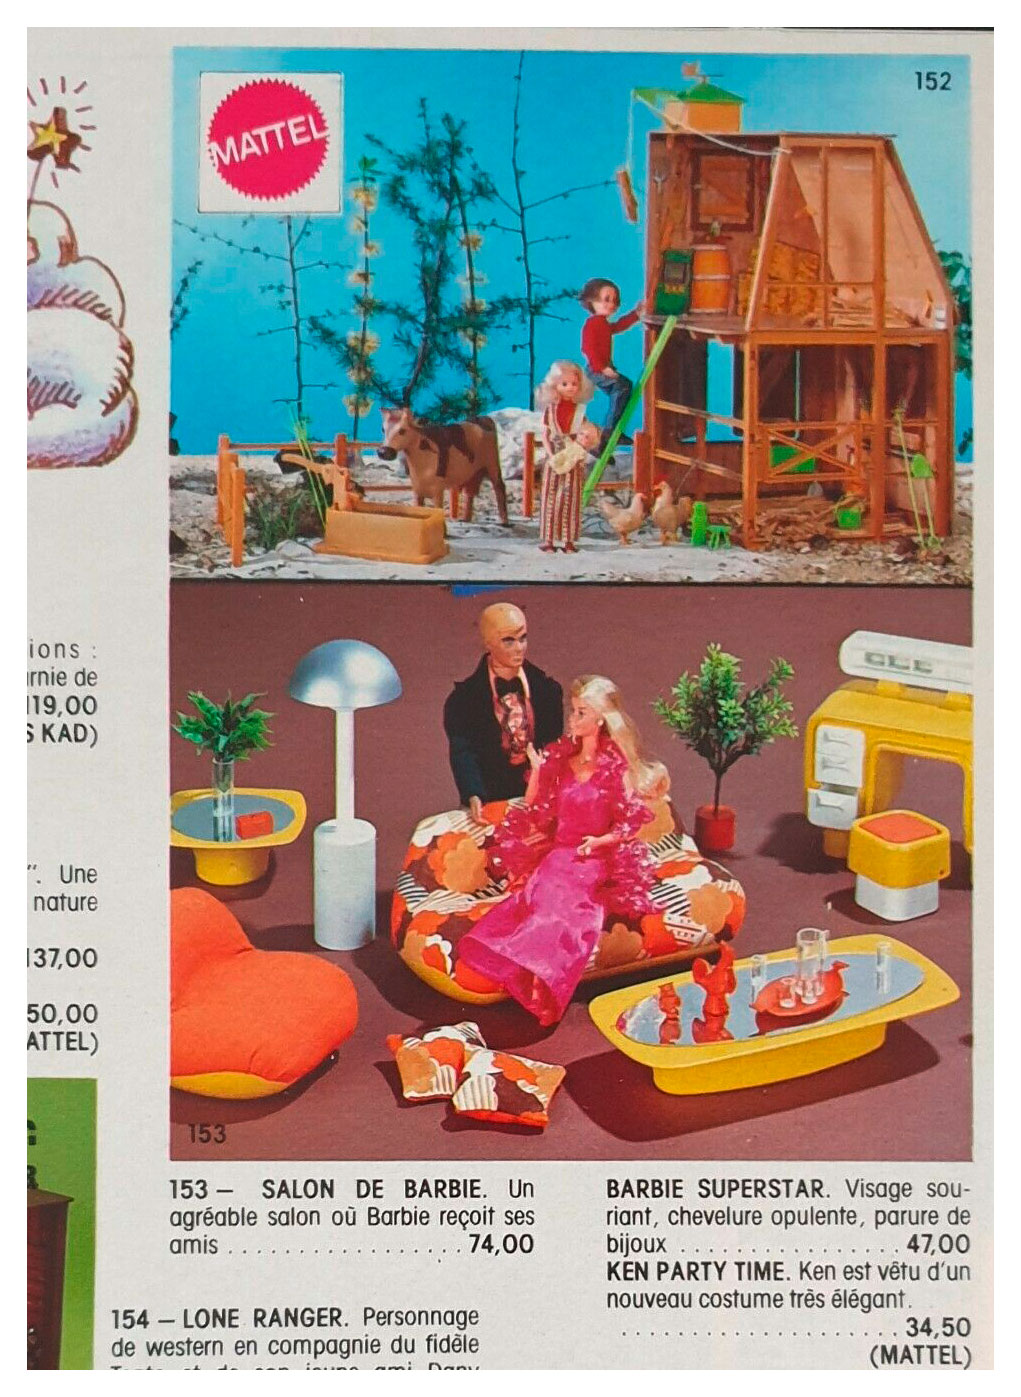 From 1977 French Jeux et Jouets catalogue